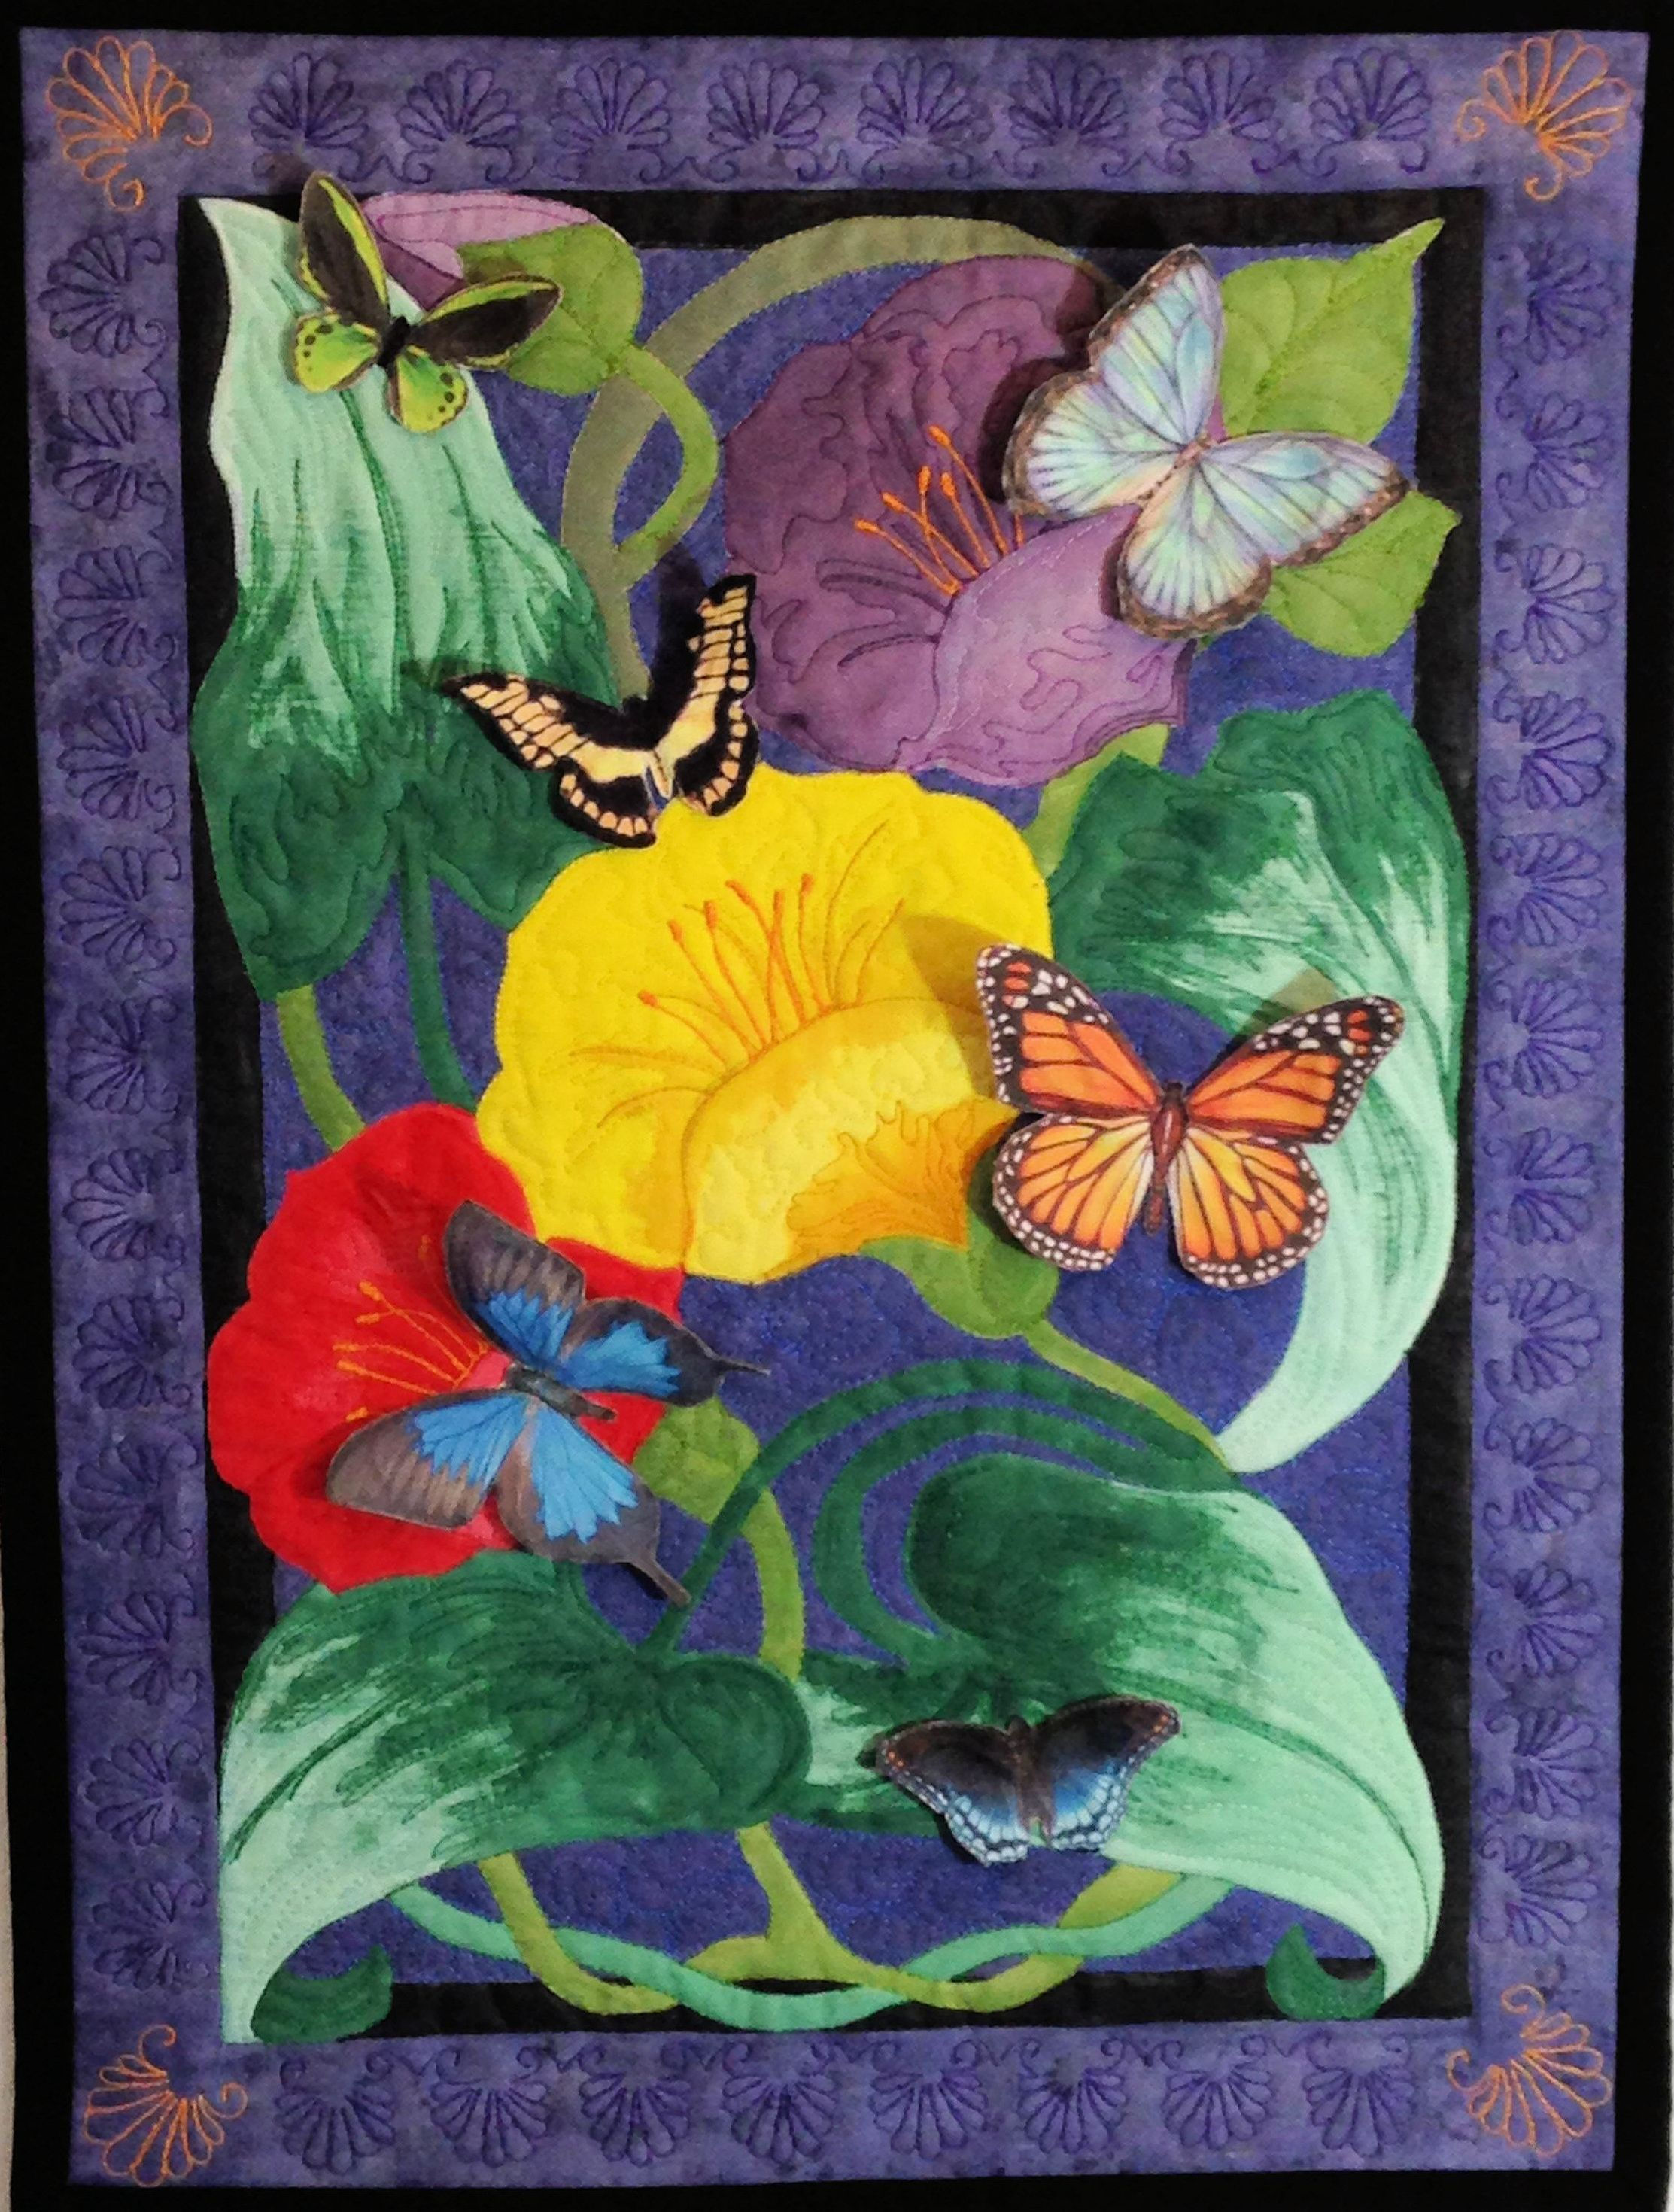 Butterfly Bait is a fiber art work in a art nouveau style with
colorful flowers surrounded by several three dimensional adjustable butterflies whose wings can be positioned in varying ways